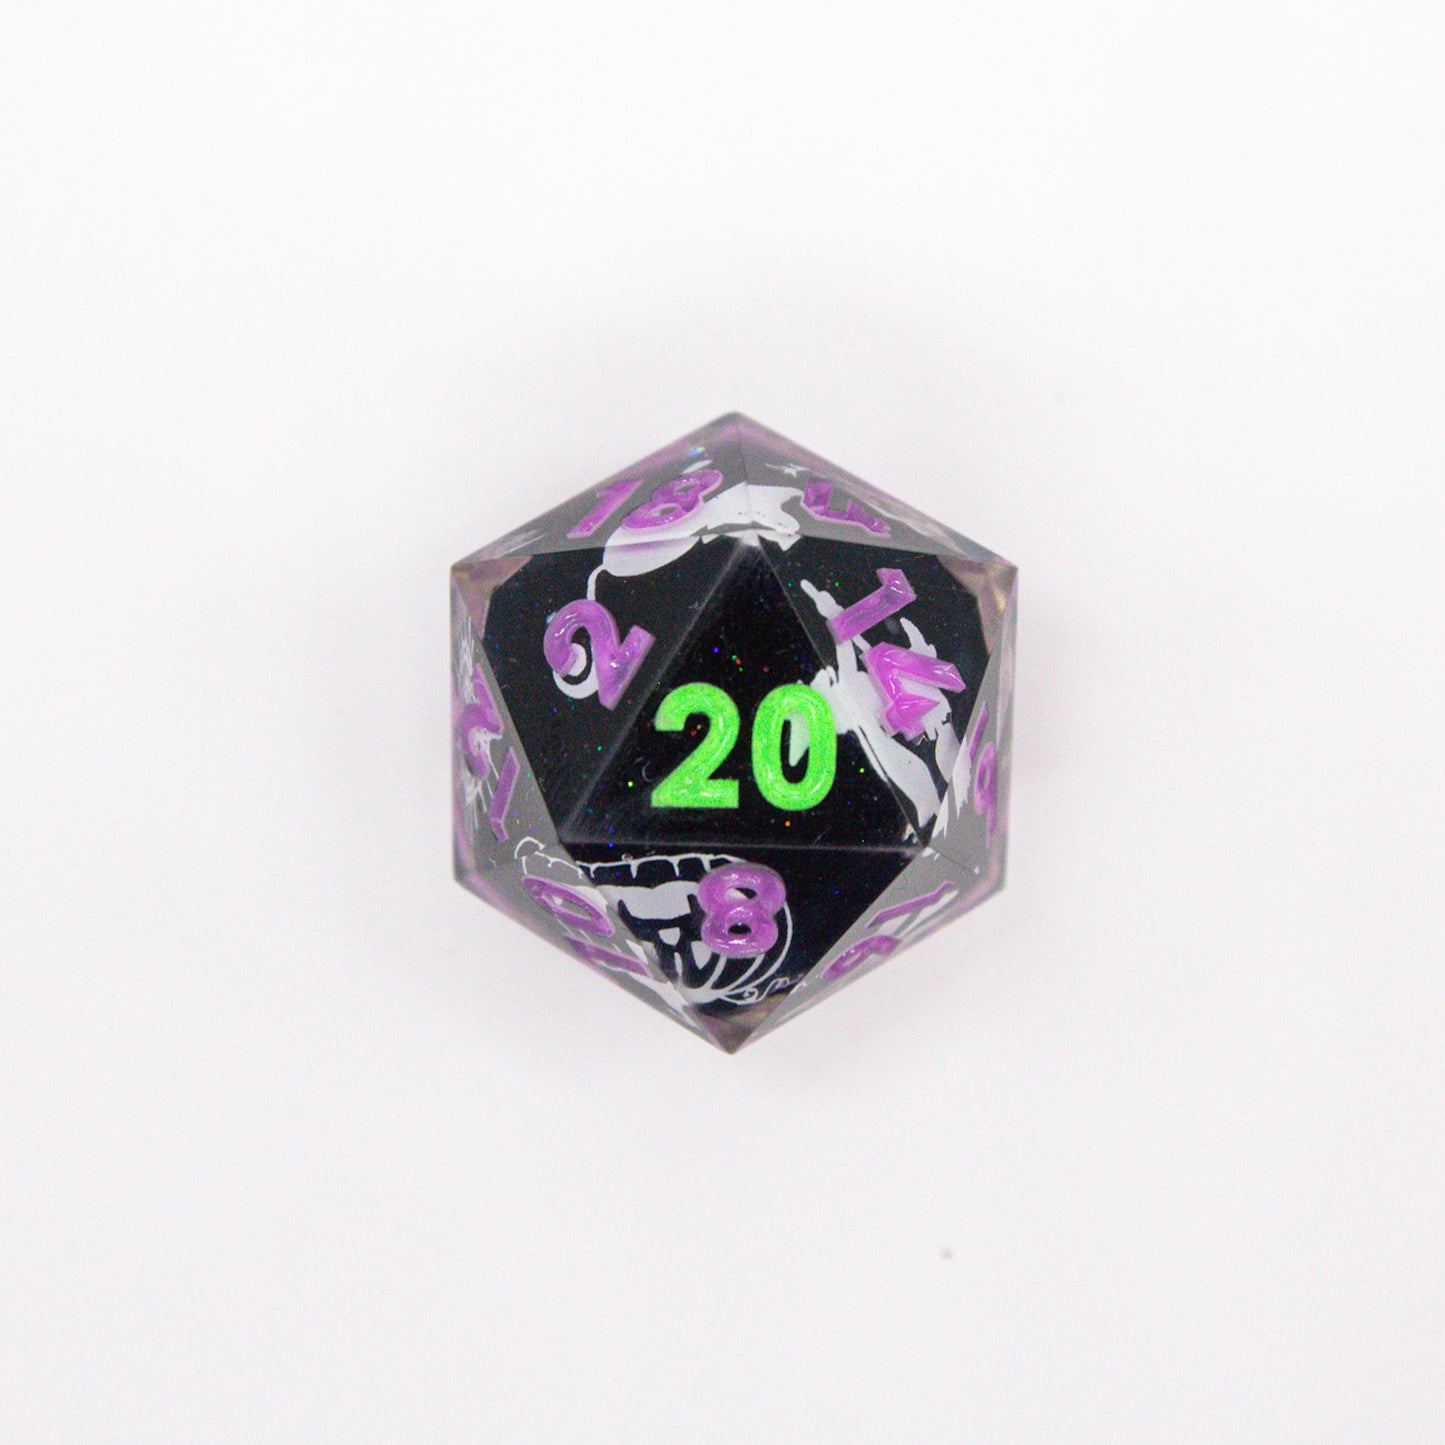 Ghostly Ghouls - Glow in the Dark Dice Set